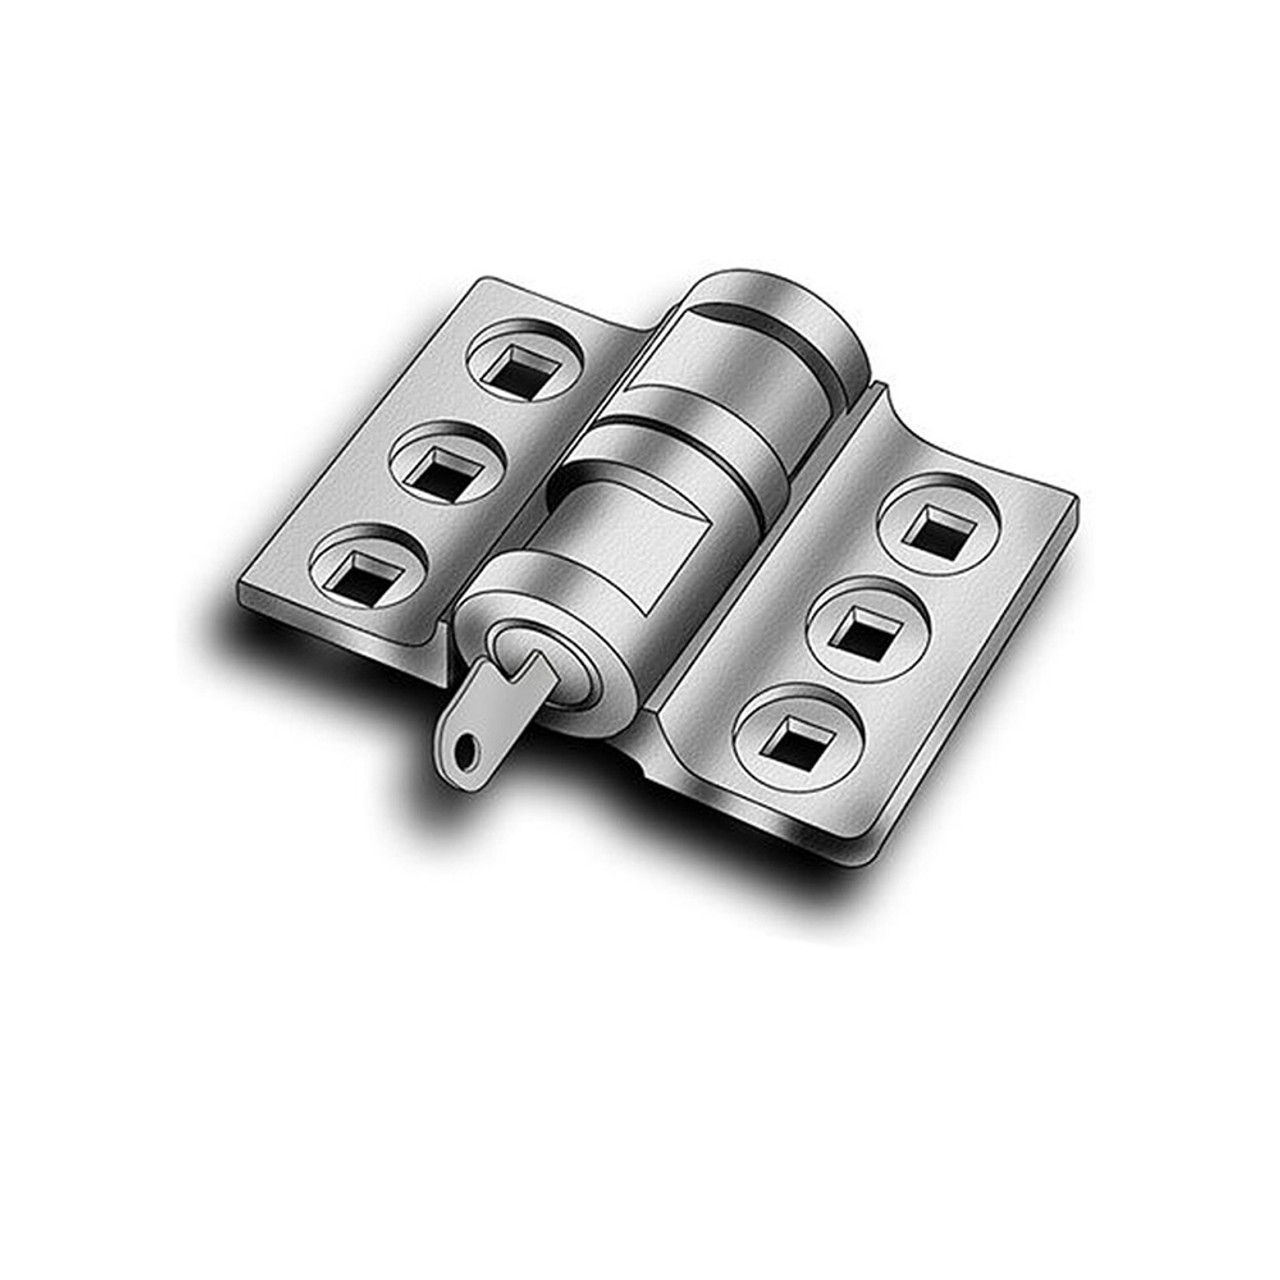 Tufloc 60-Series High-Security Door Locks for Vans and Buildings, made of Illium Alloy, Features Medeco high-security cylinders, Mounts to Fit Inward, Outward, Double-Swinging, Sliding and Roll-Up Doors, Criminal Resistant Design, For Military